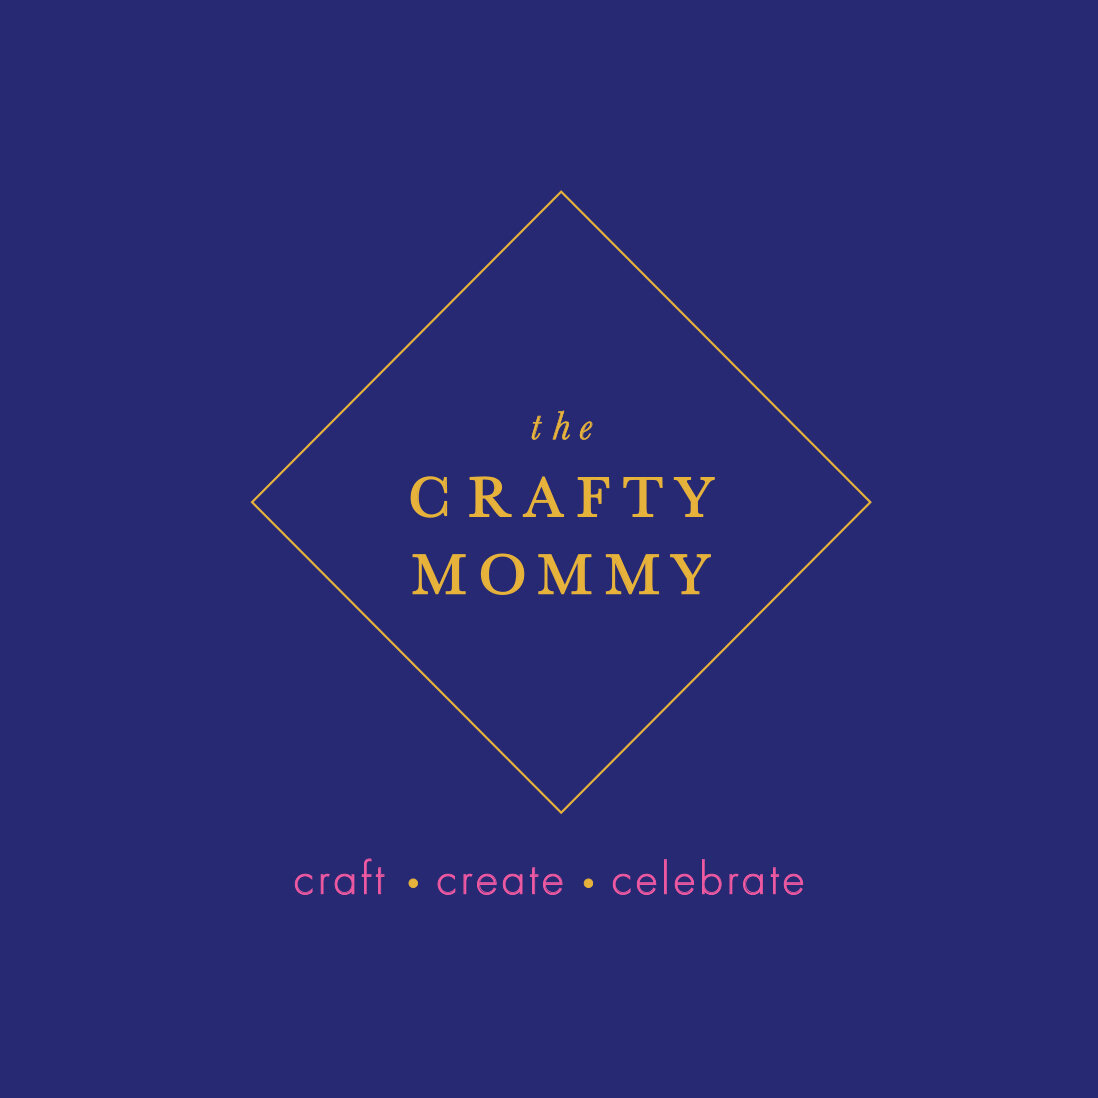 The Crafty Mommy